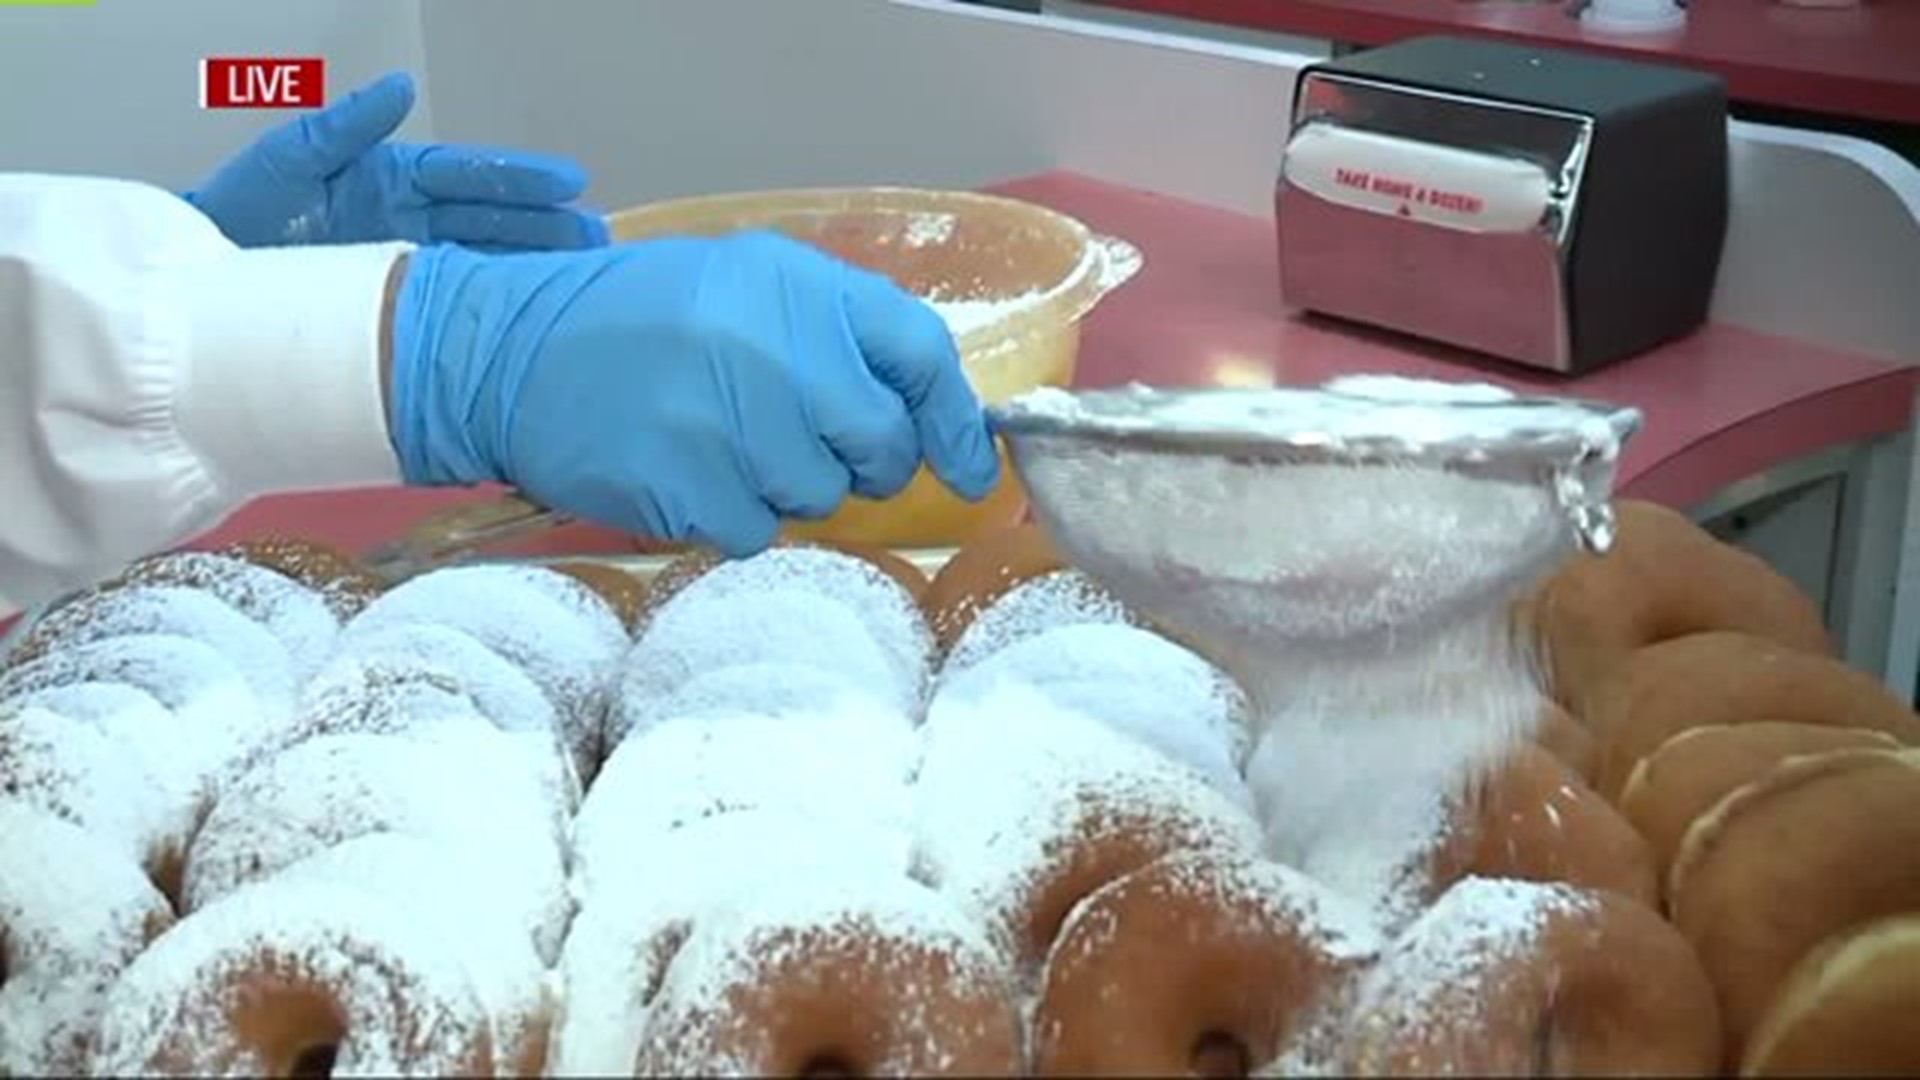 How Maple Donuts in York is getting ready for Fasnacht Day tomorrow